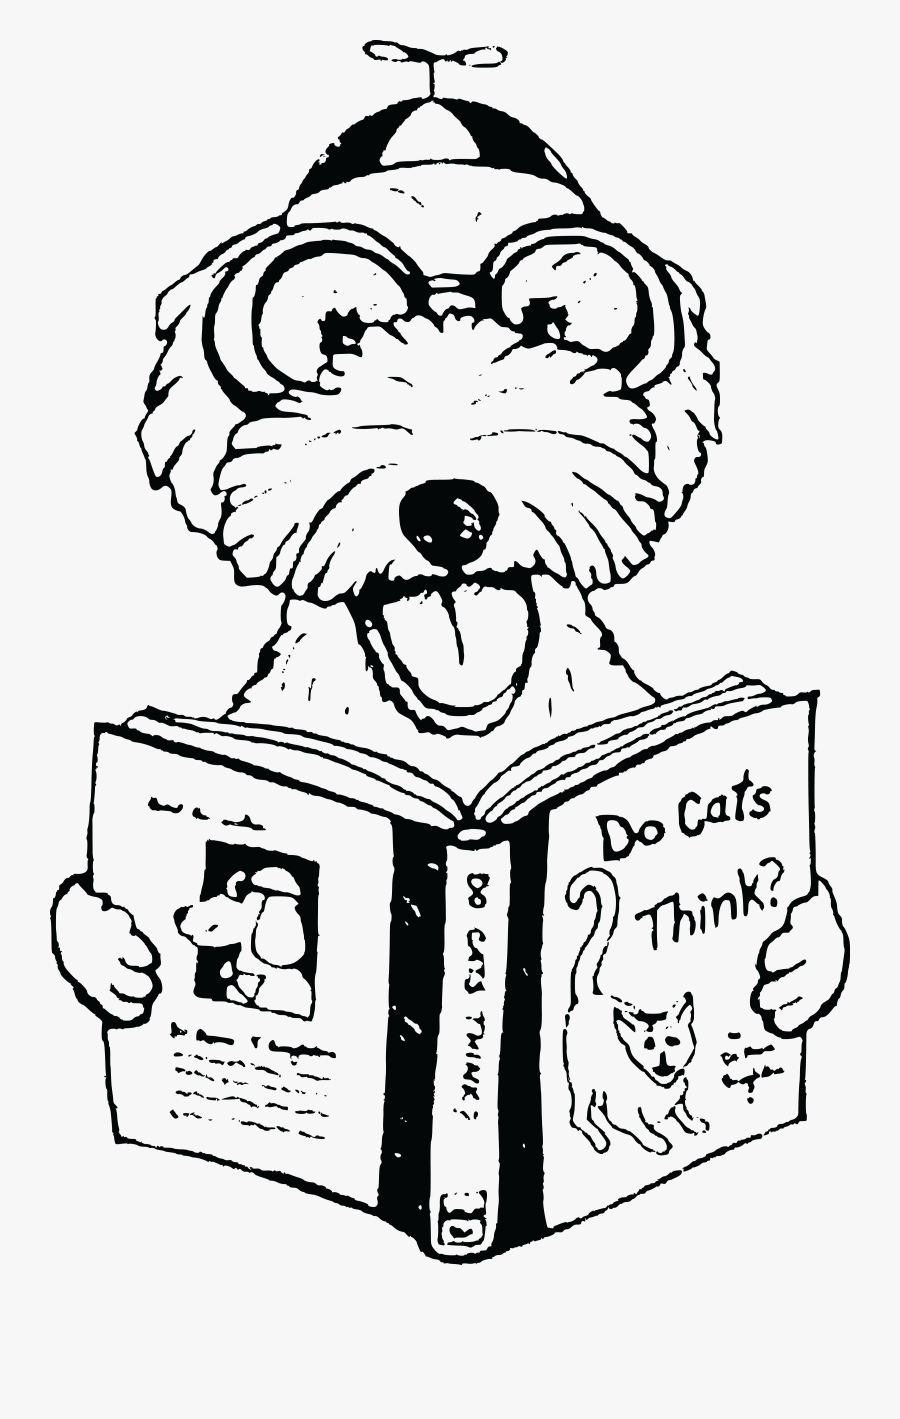 Free Clipart Of A Dog Reading A Book About Cats - Dog And Book Free Clip Art, Transparent Clipart